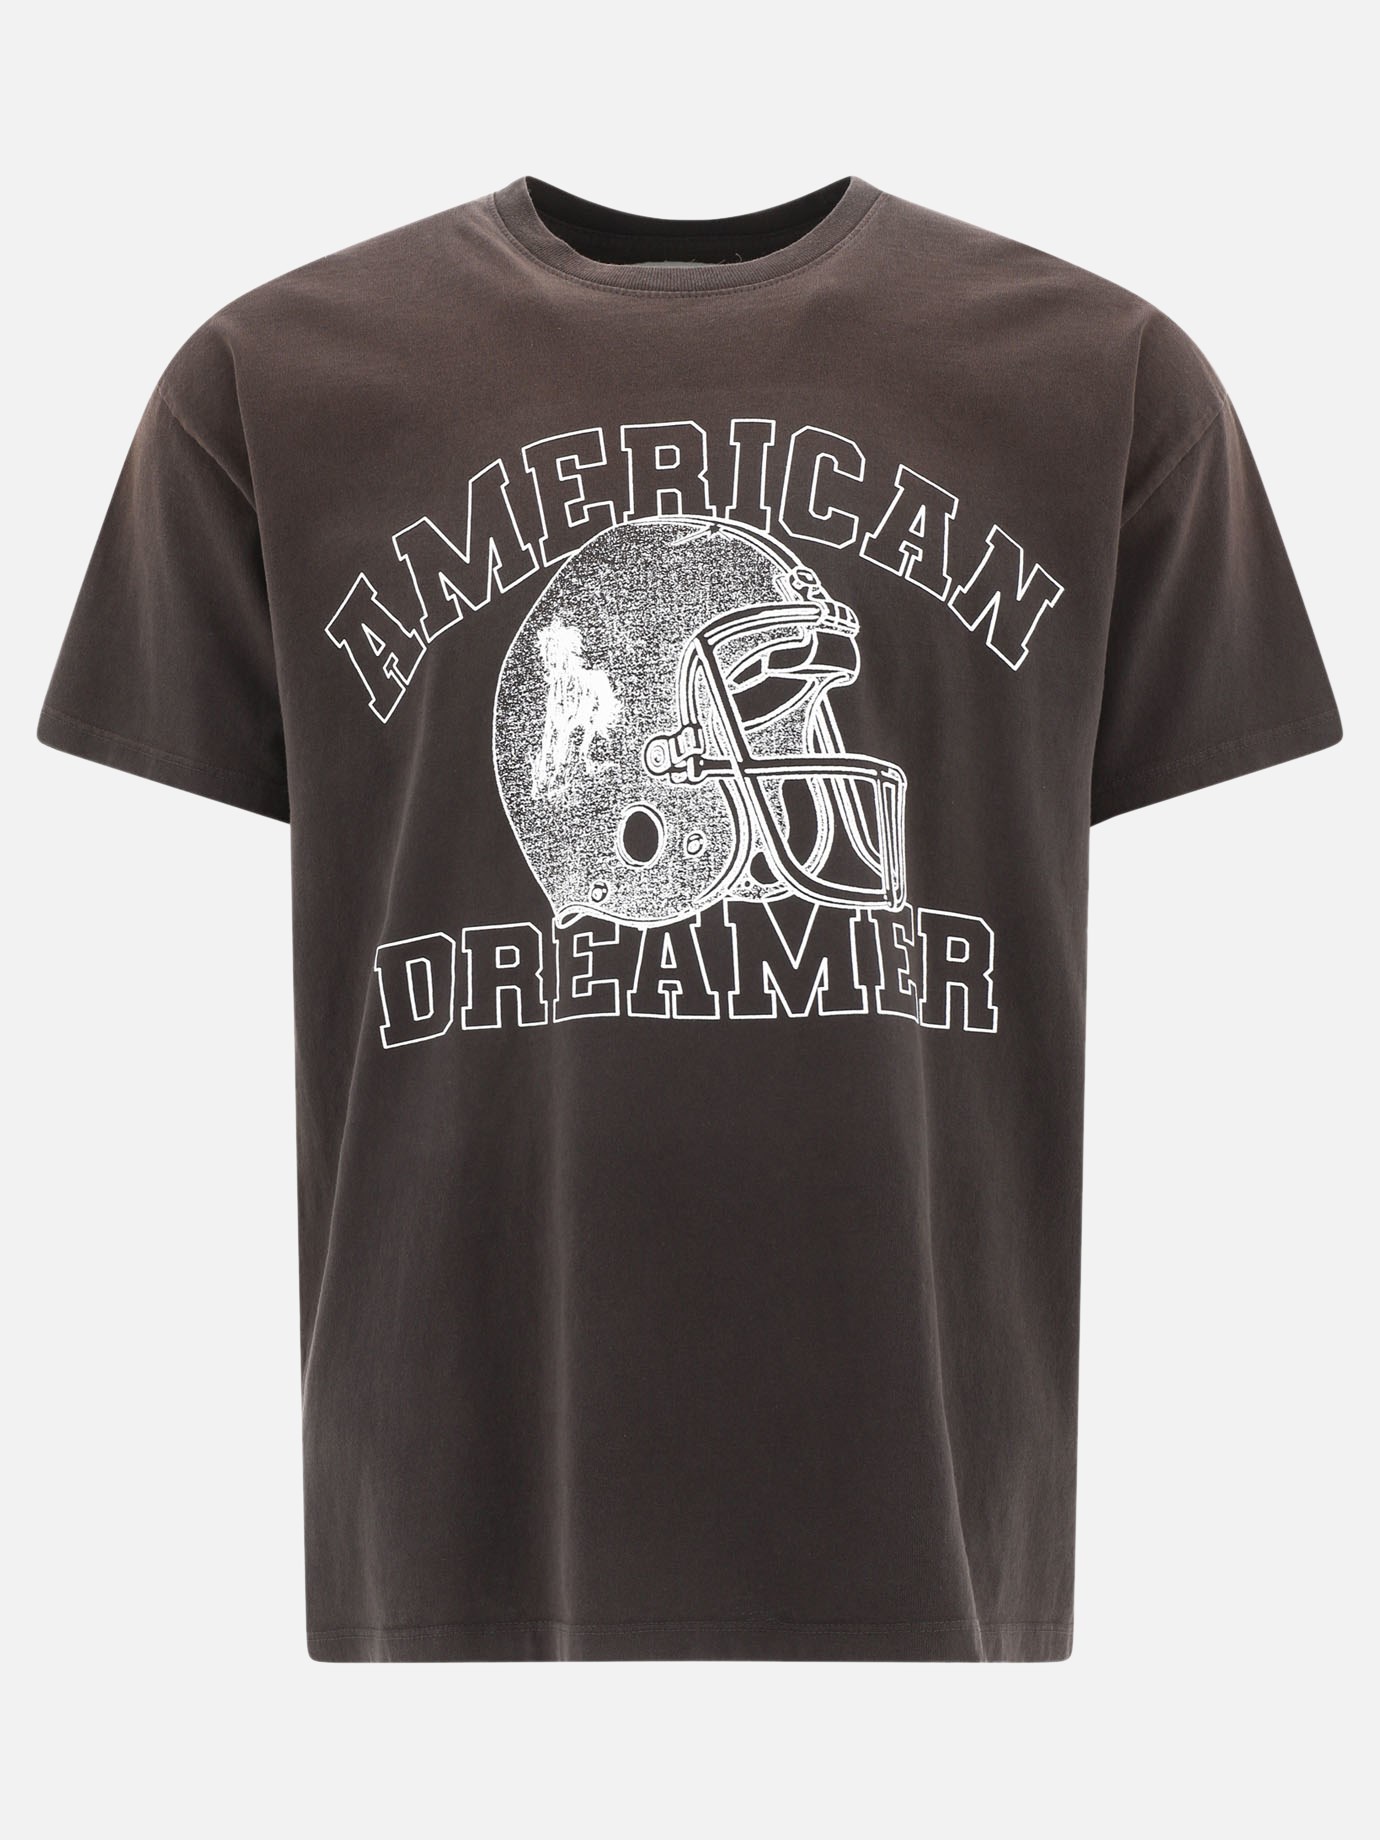 T-shirt  American Dreamer  by One Of These Days